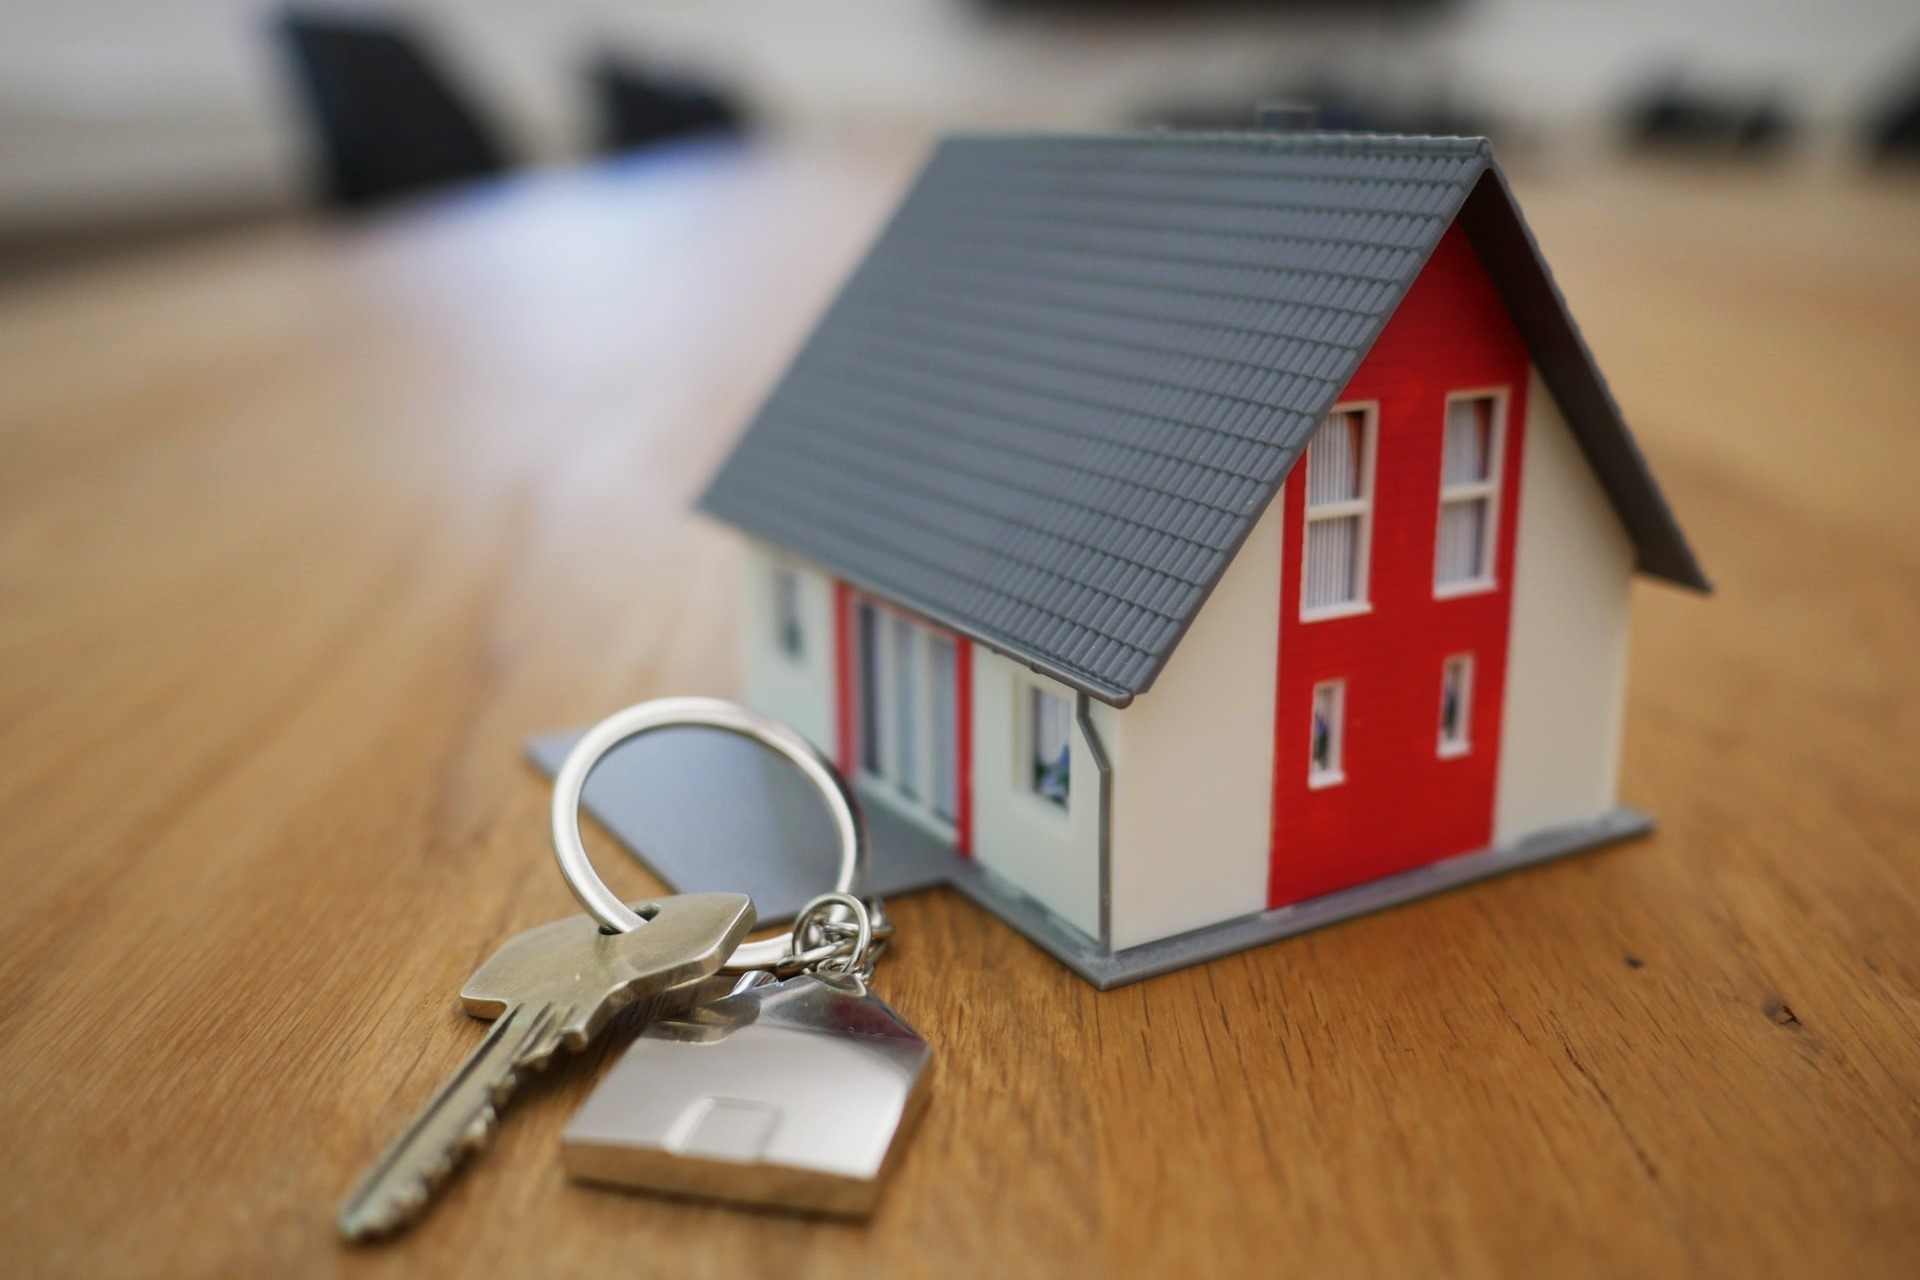 Protect Your Home Title From Theft With Home Title Lock – Does It Really Work? Find Out Now!